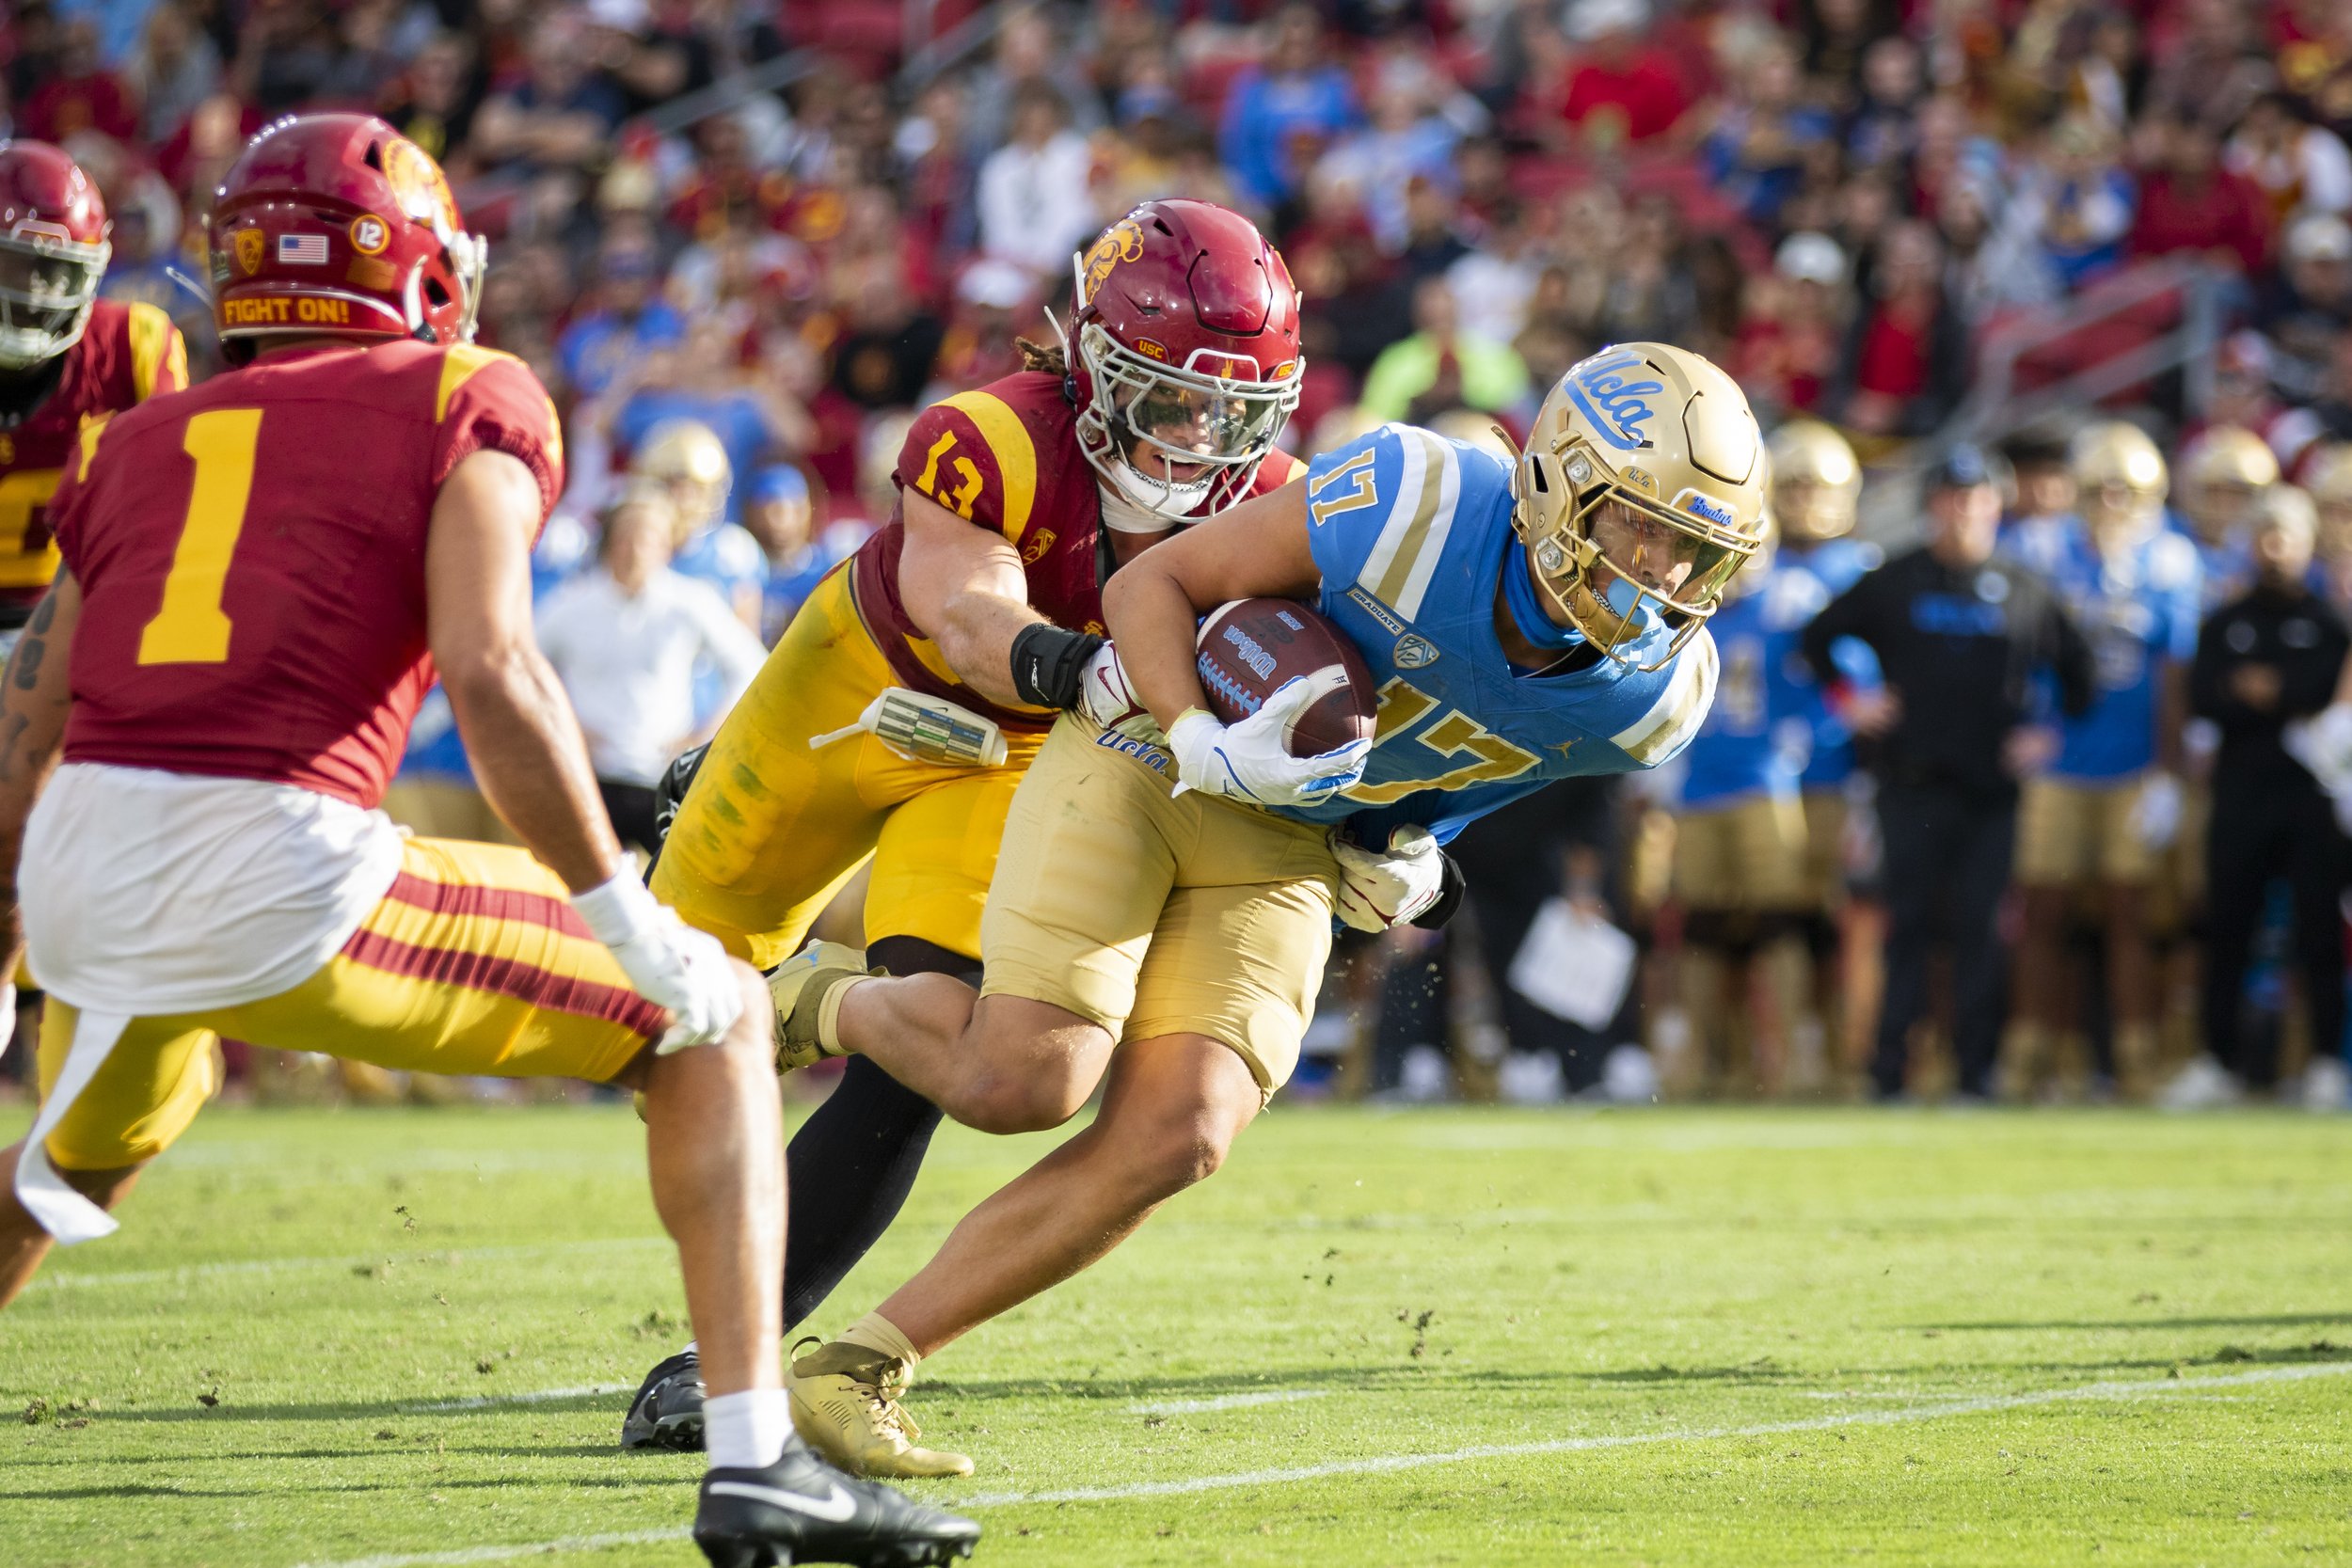  University of Southern California (USC) Trojan  middle linebacker Mason Cobb (center left) tackling University of California, Los Angeles (UCLA) Bruin wide receiver Logan Loya (center right) during the third quarter of a football game at the Los Ang